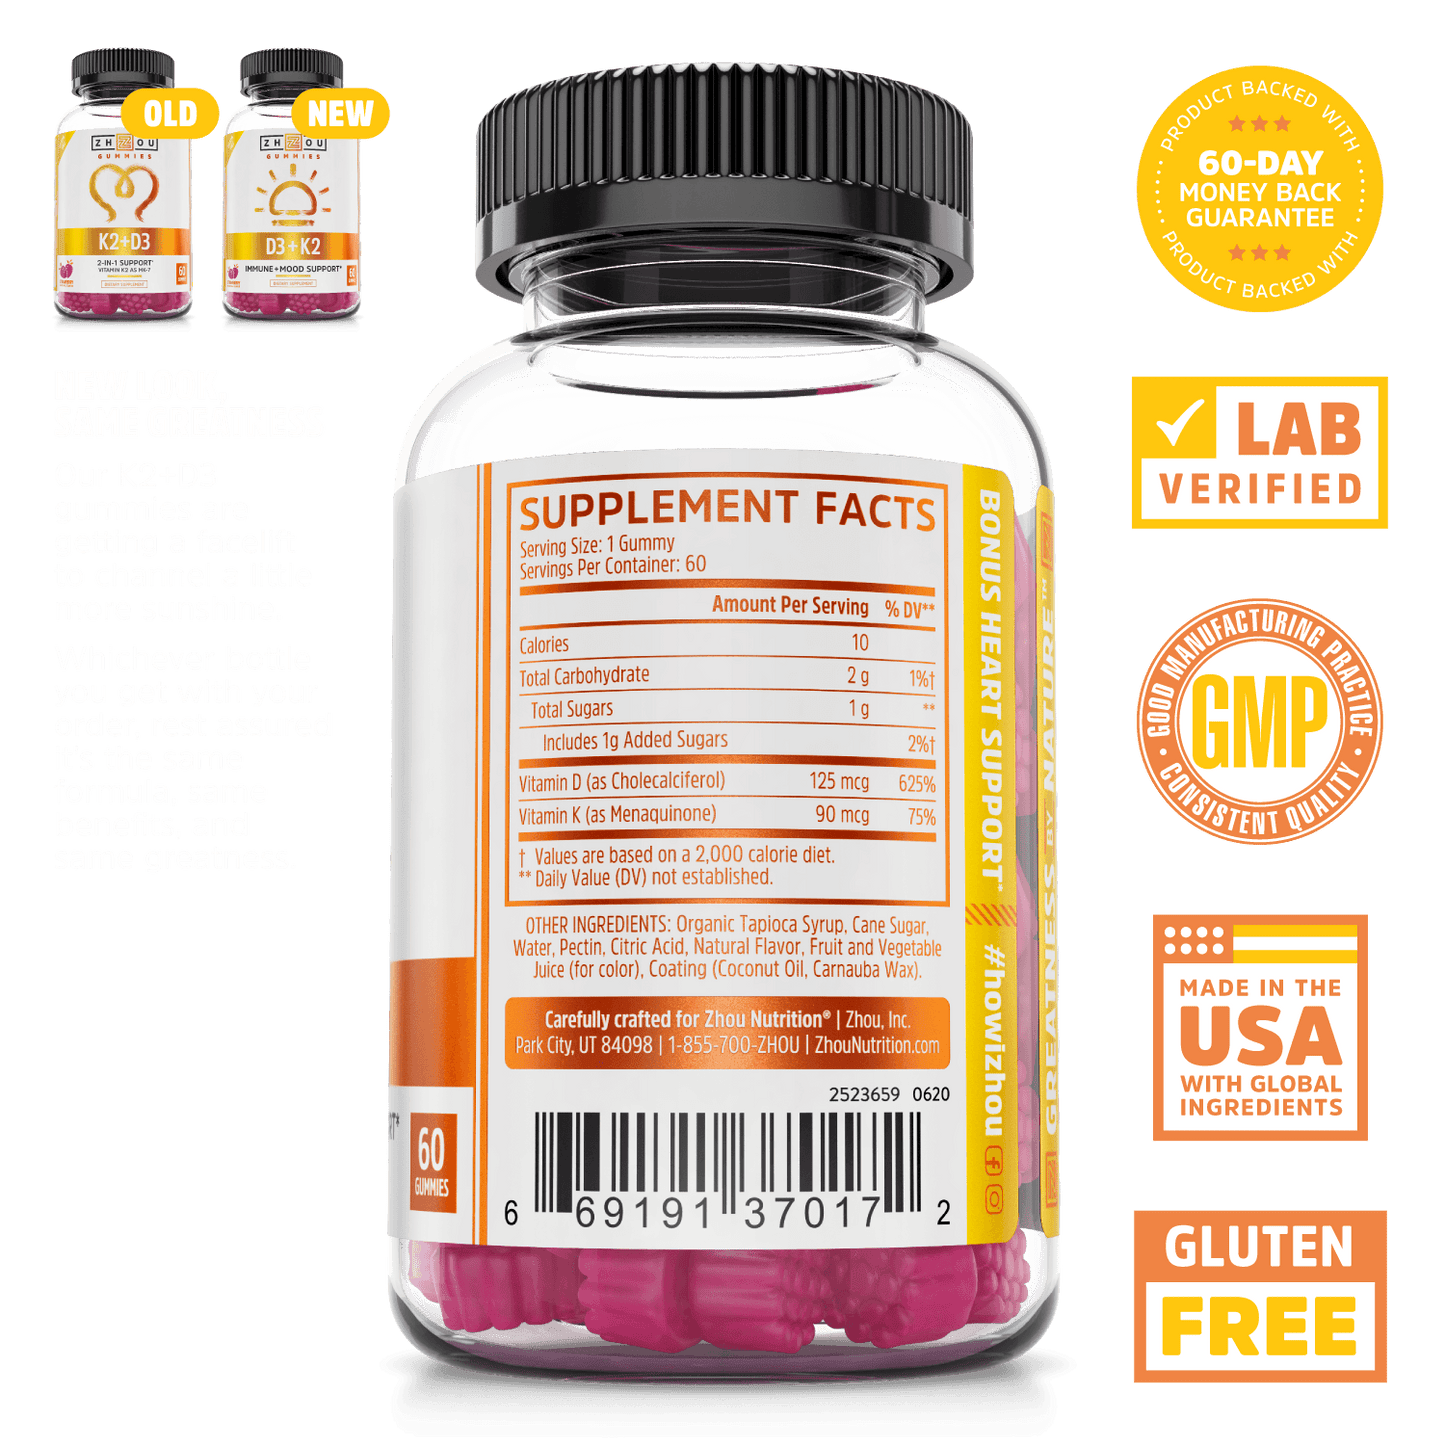 Zhou K2 D3 gummy supplement. 60-day money back guarantee, lab verified, vegetarian, good manufacturing practices, made in the USA with global ingredients, gluten free